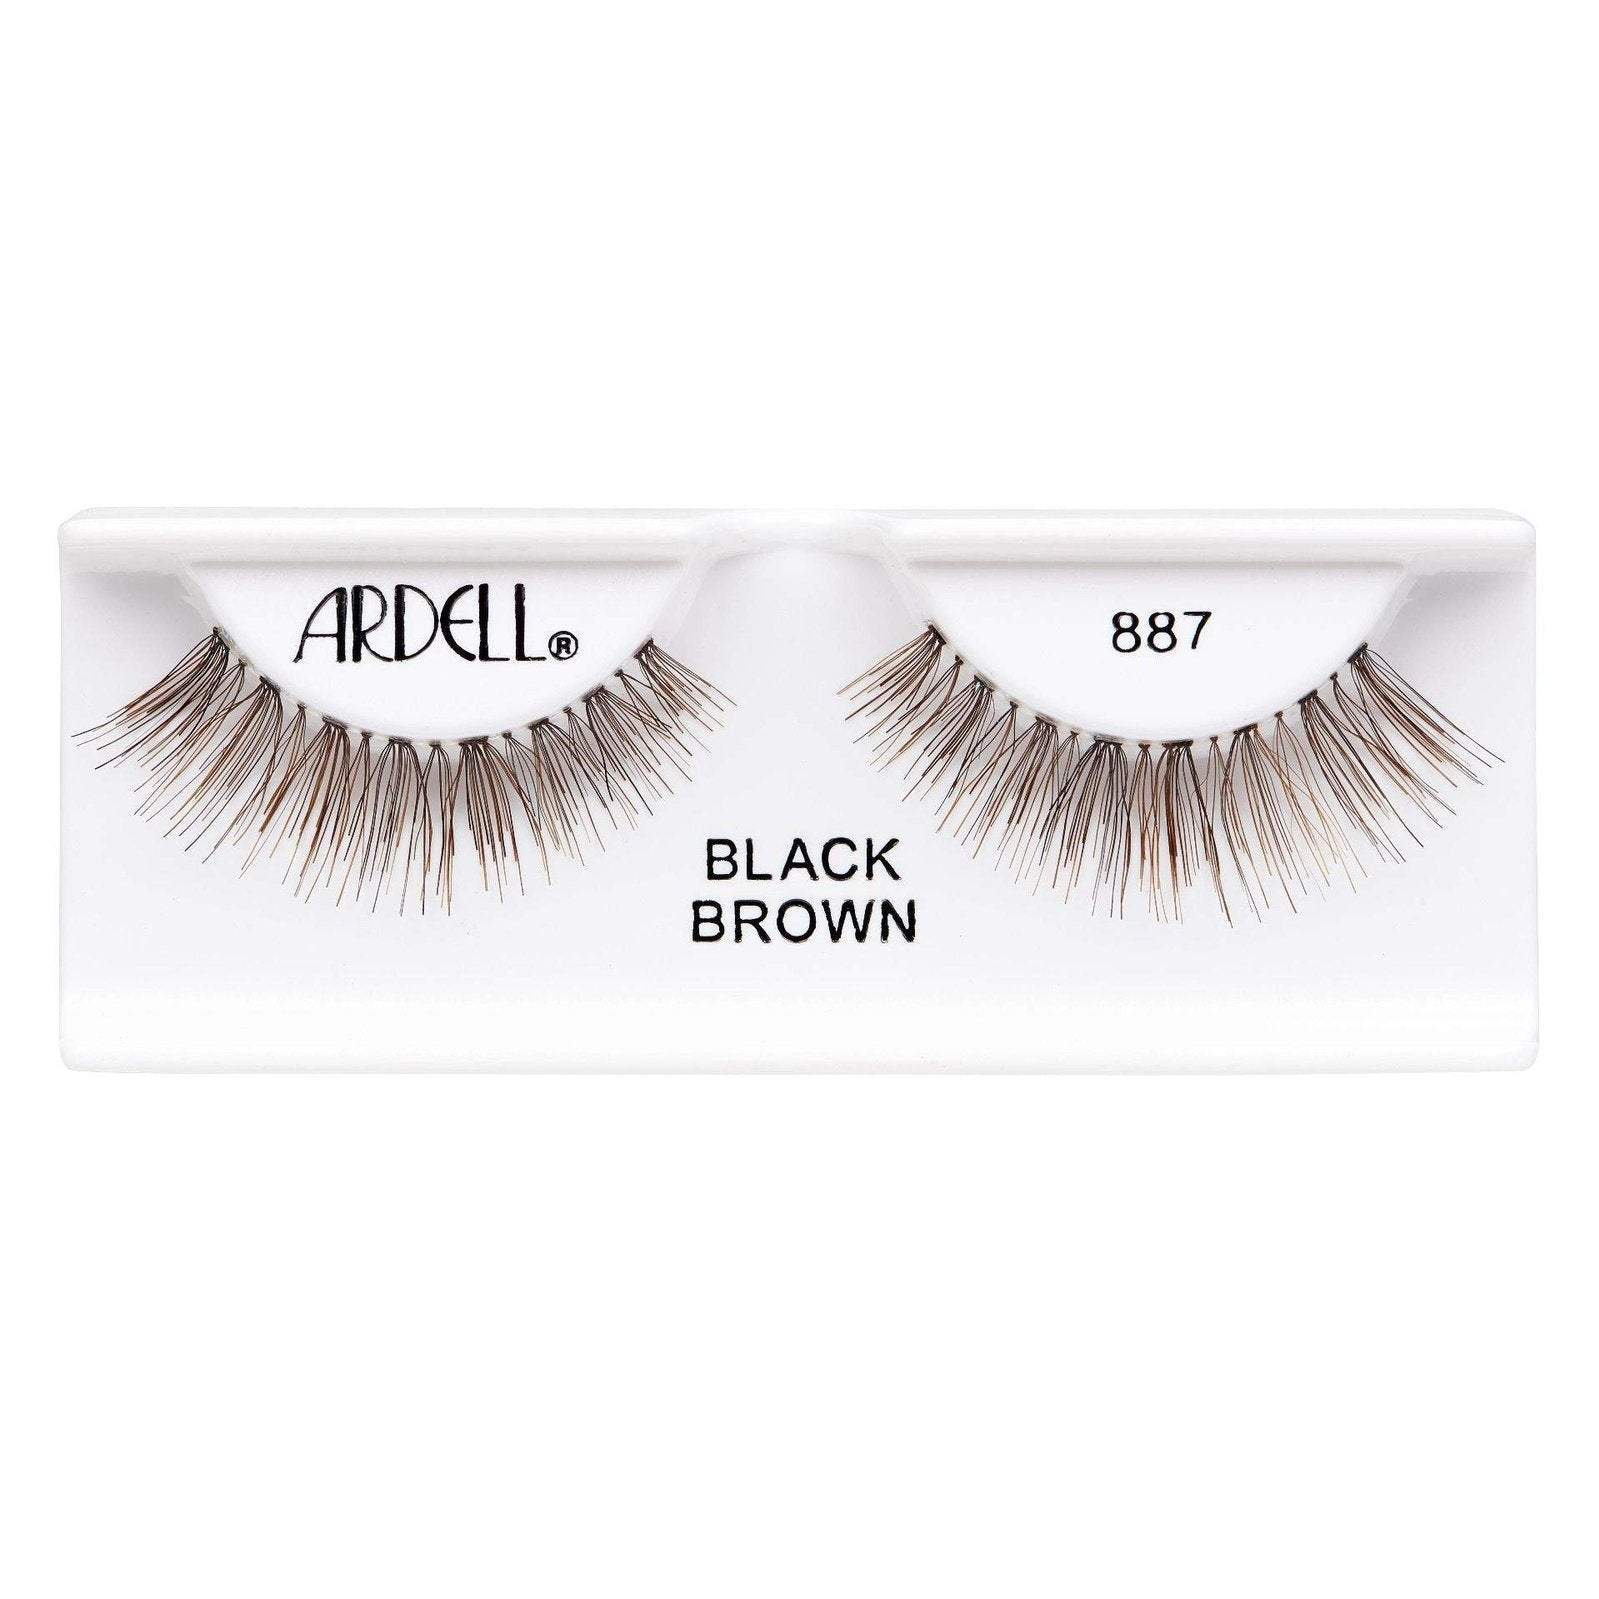 Ardell Chocolate 887 Black/Brown Faux Lashes-Ardell-ARD_Natural,Brand_Ardell,Collection_Makeup,Makeup_Eye,Makeup_Faux Lashes,Season_Fall